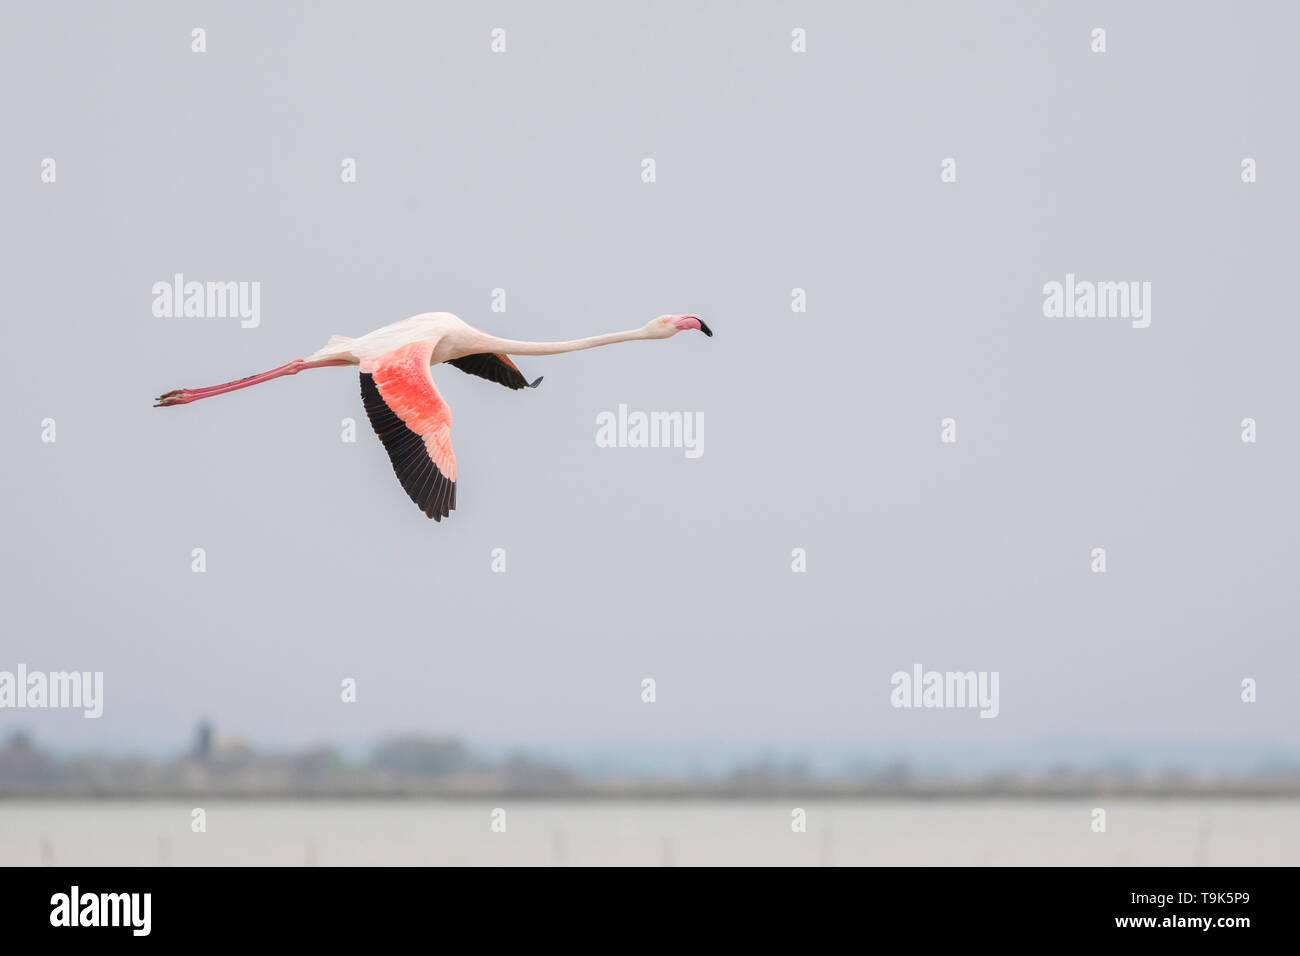 Greater flamingos, Phoenicopterus roseus, flying in Camargue, France. Stock Photo